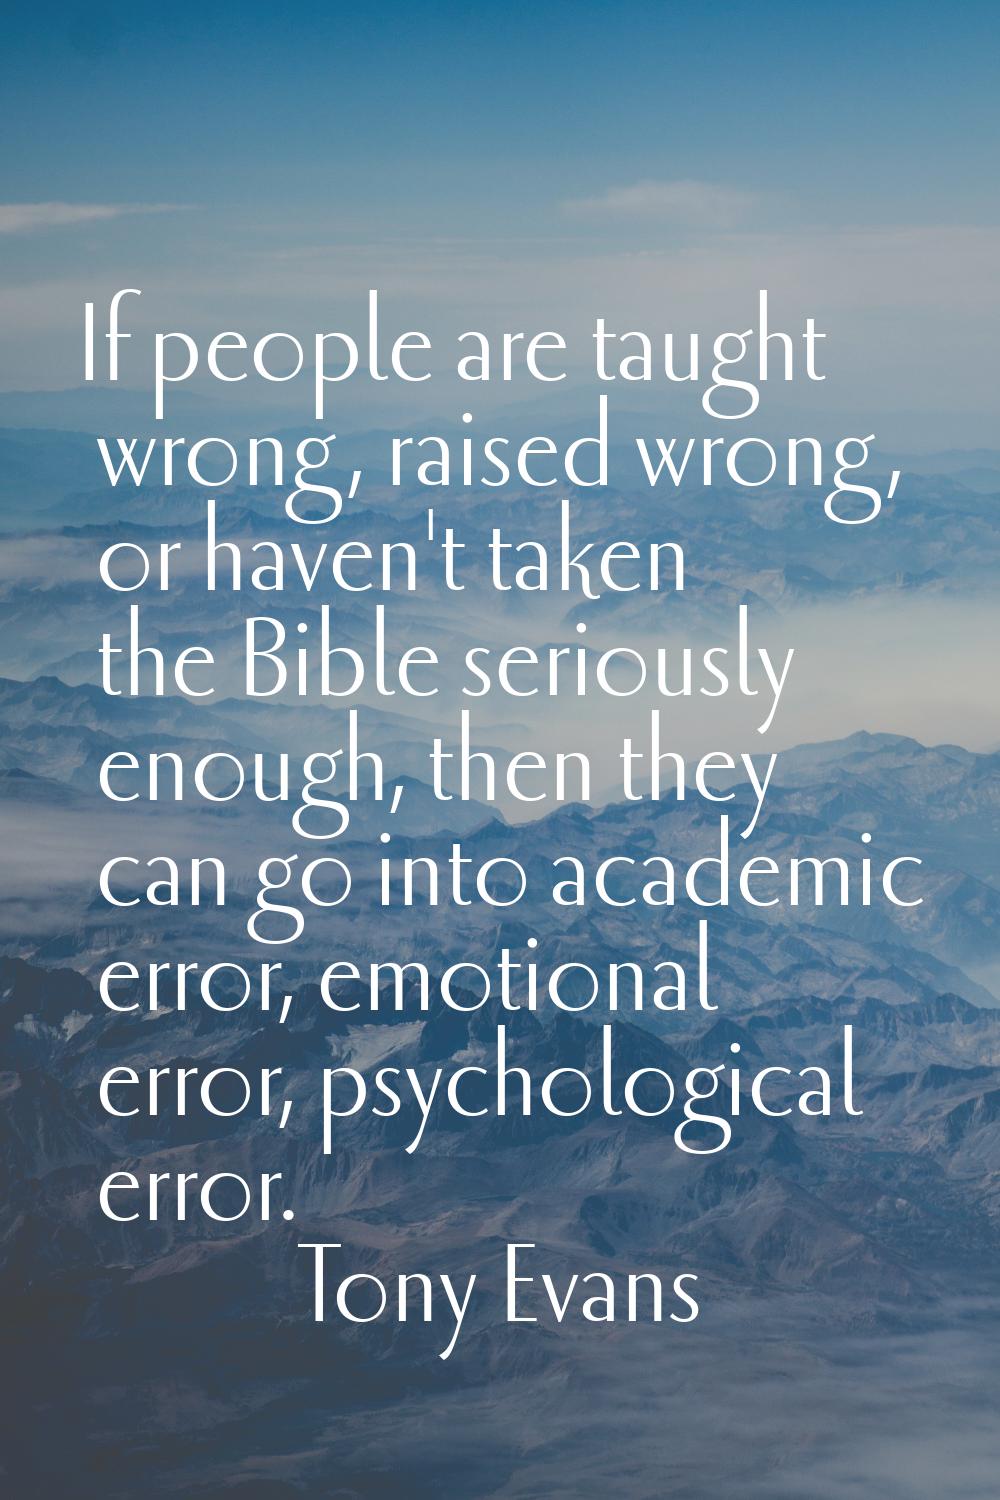 If people are taught wrong, raised wrong, or haven't taken the Bible seriously enough, then they ca